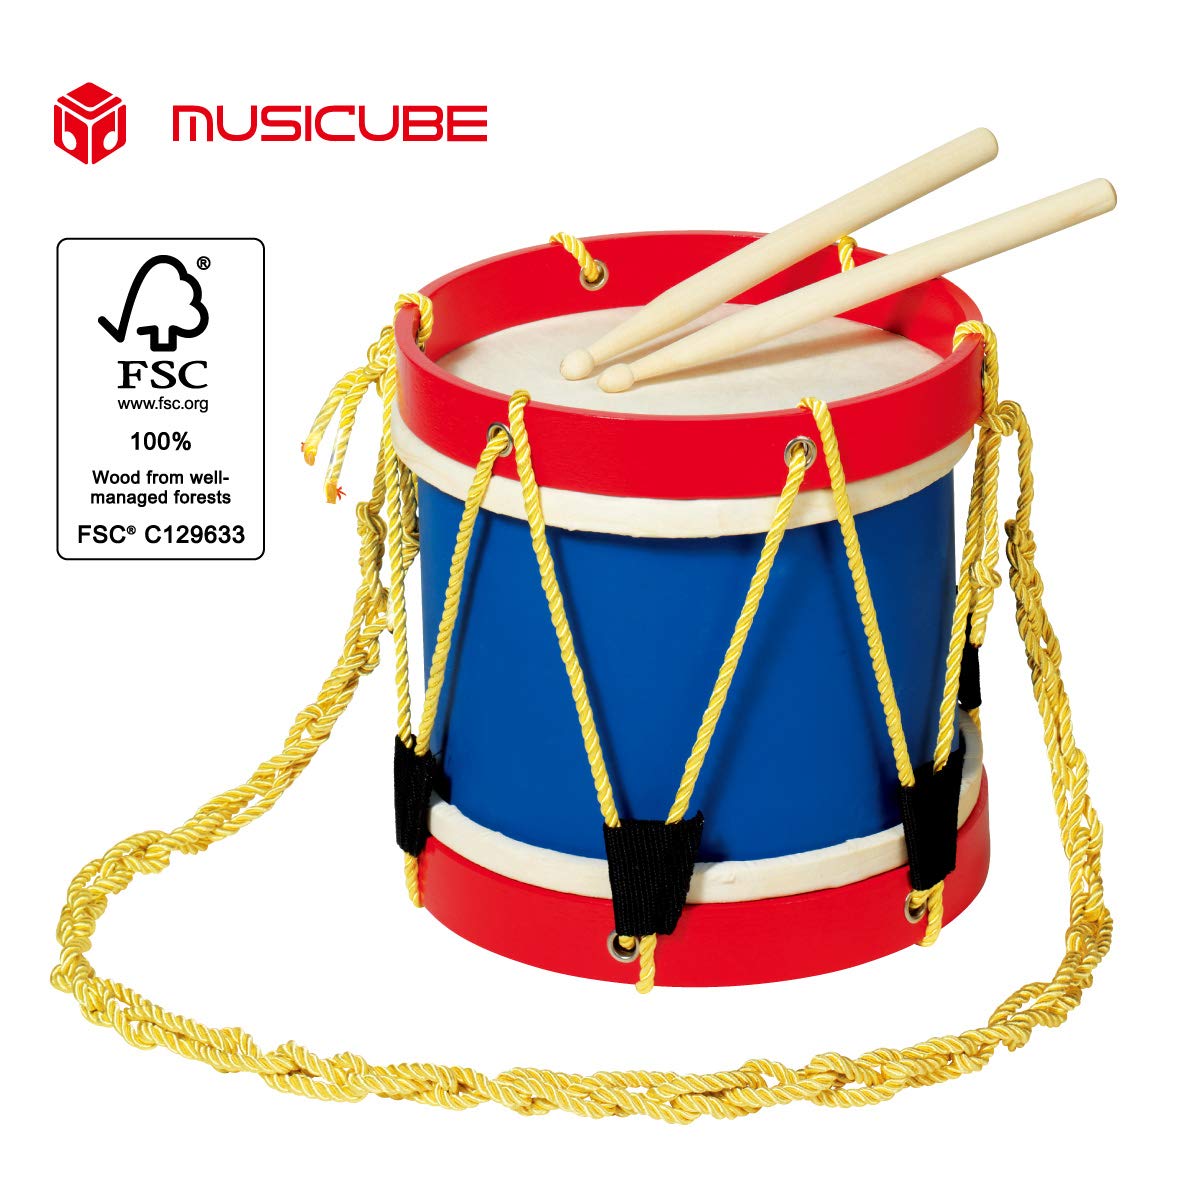 MUSICUBE Marching Drum Set, USA America Painted Design, Great Sound Quality 8 Inch for Kids with Stick